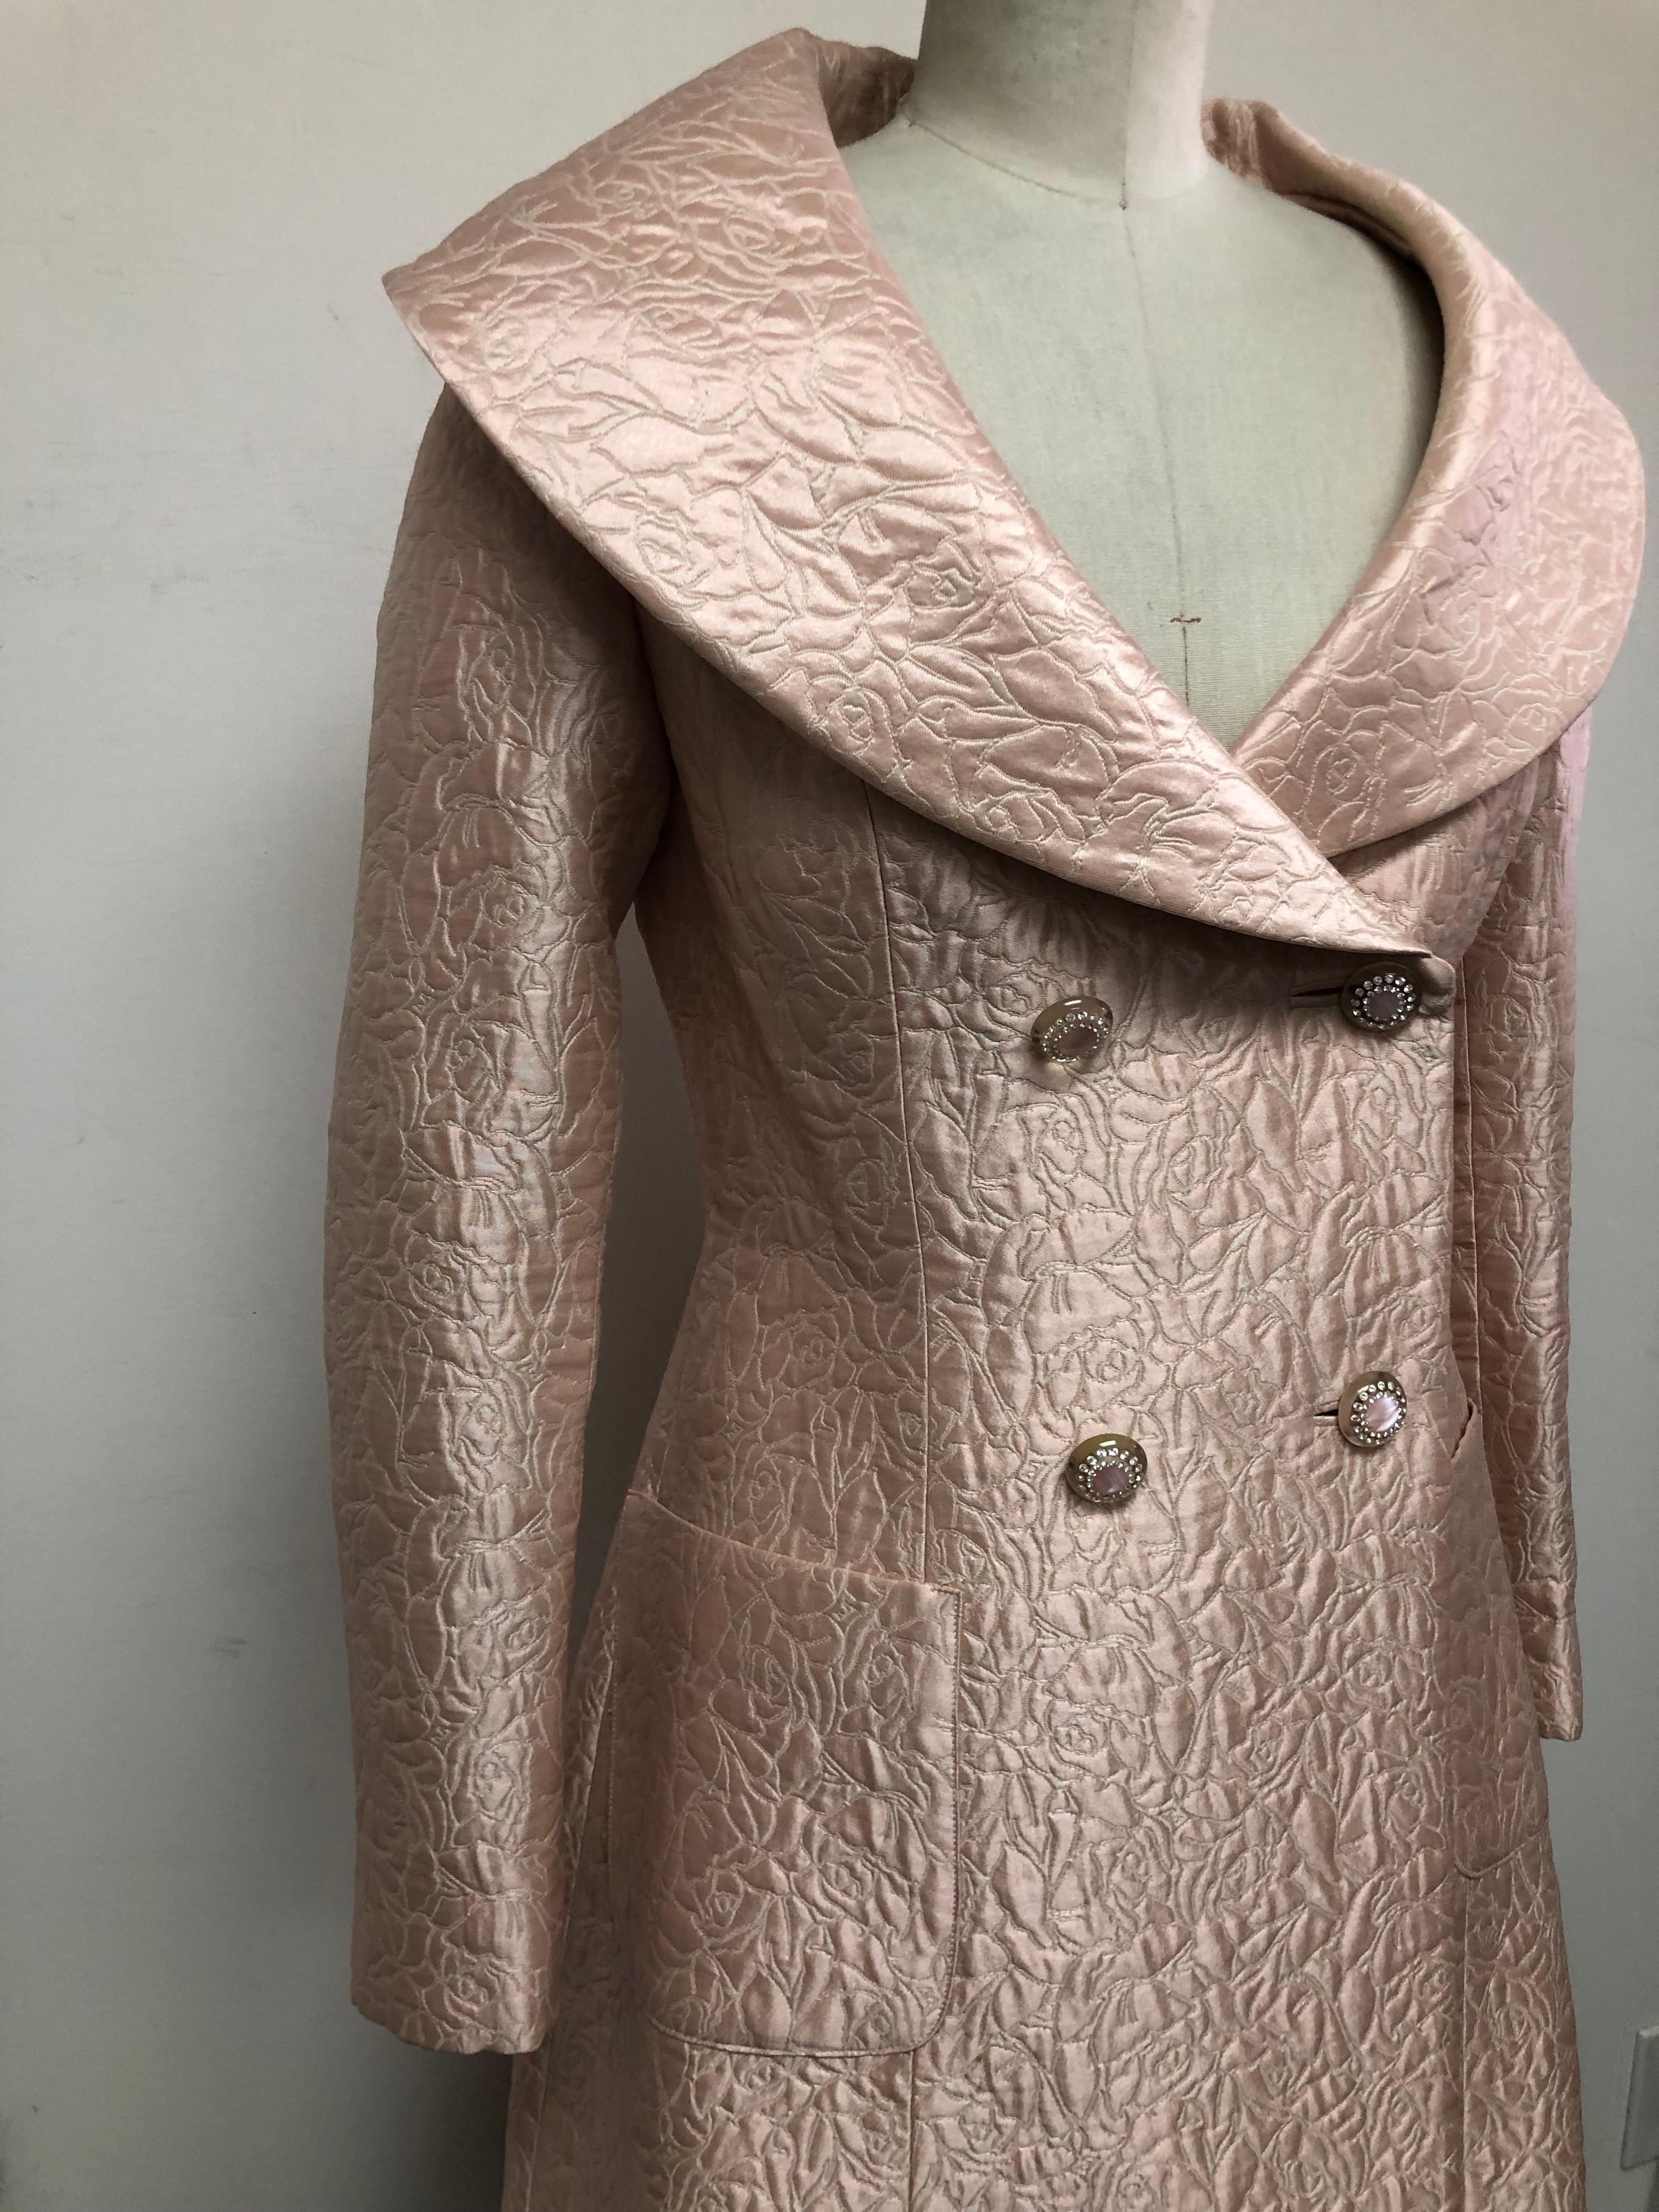 Blush Pink Fit and Flare Portrait Collar Coat in the finest Swiss Silk Matelasse with Diamonte Buttons. Perfect for day into evening as a wedding guest, for luncheon parties or cocktails. Pairs perfectly with black or white.
For your convenience the